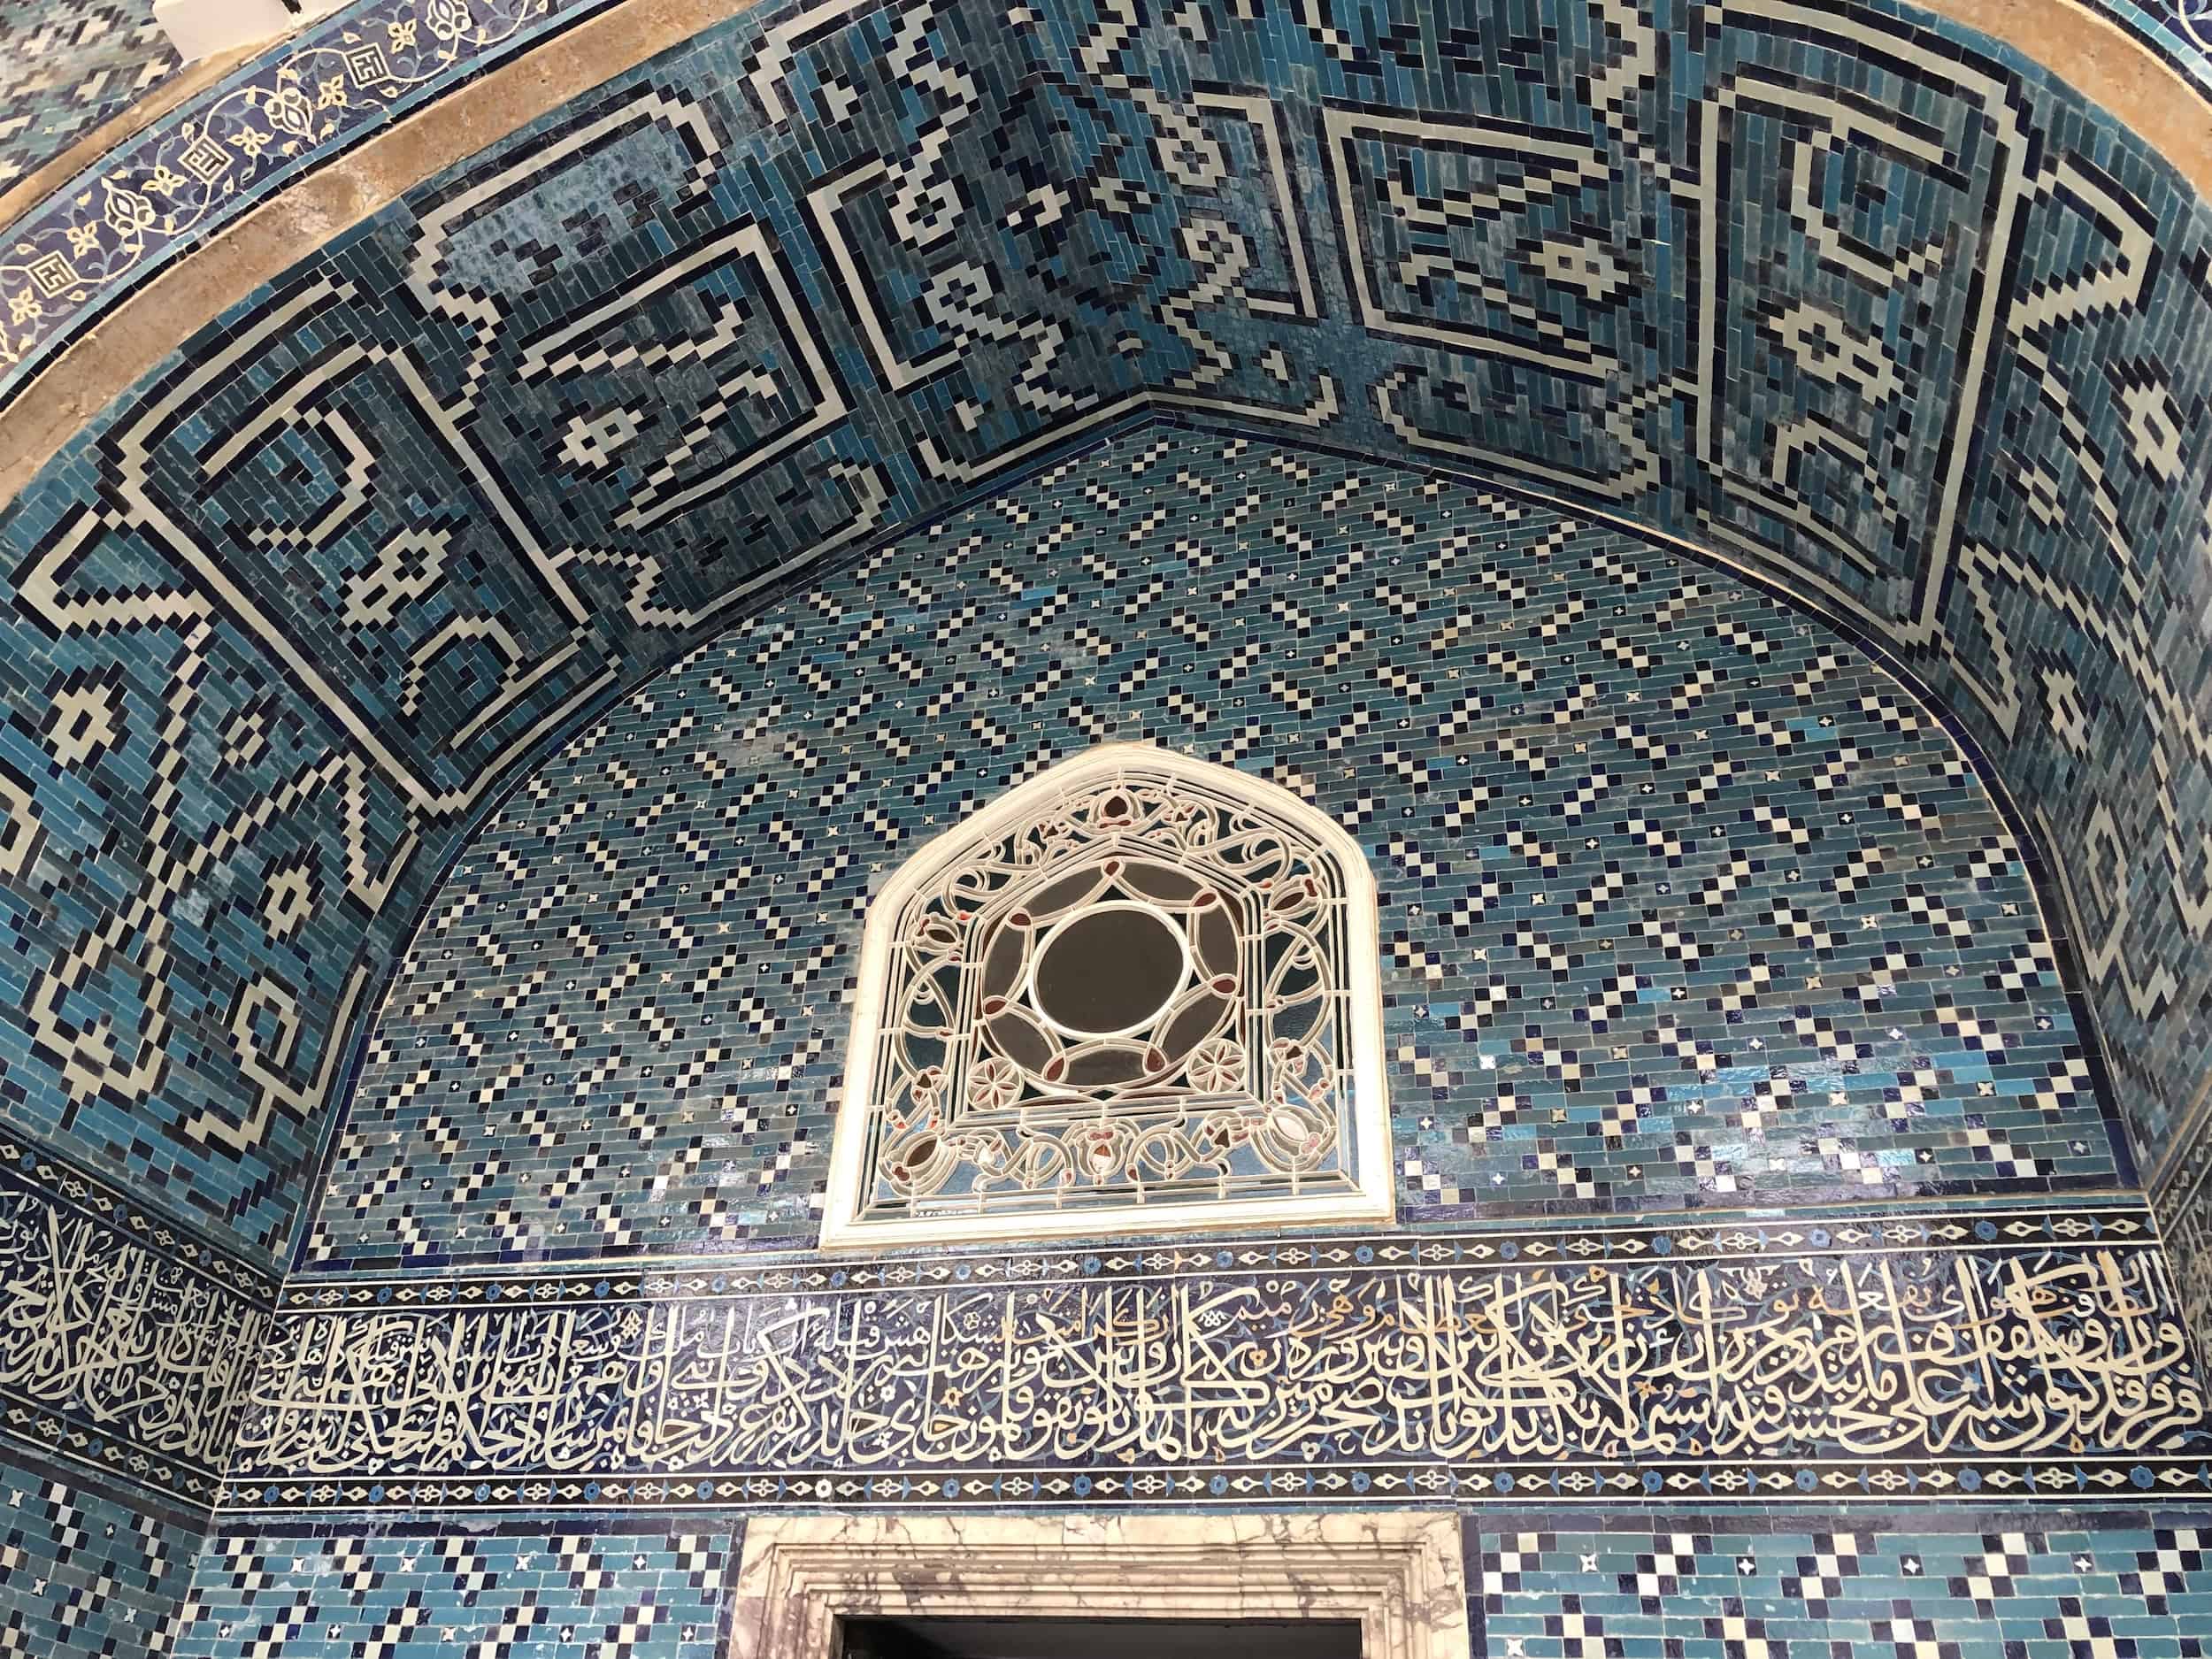 Tiles at the entrance at the Tiled Kiosk at the Istanbul Archaeology Museums in Istanbul, Turkey